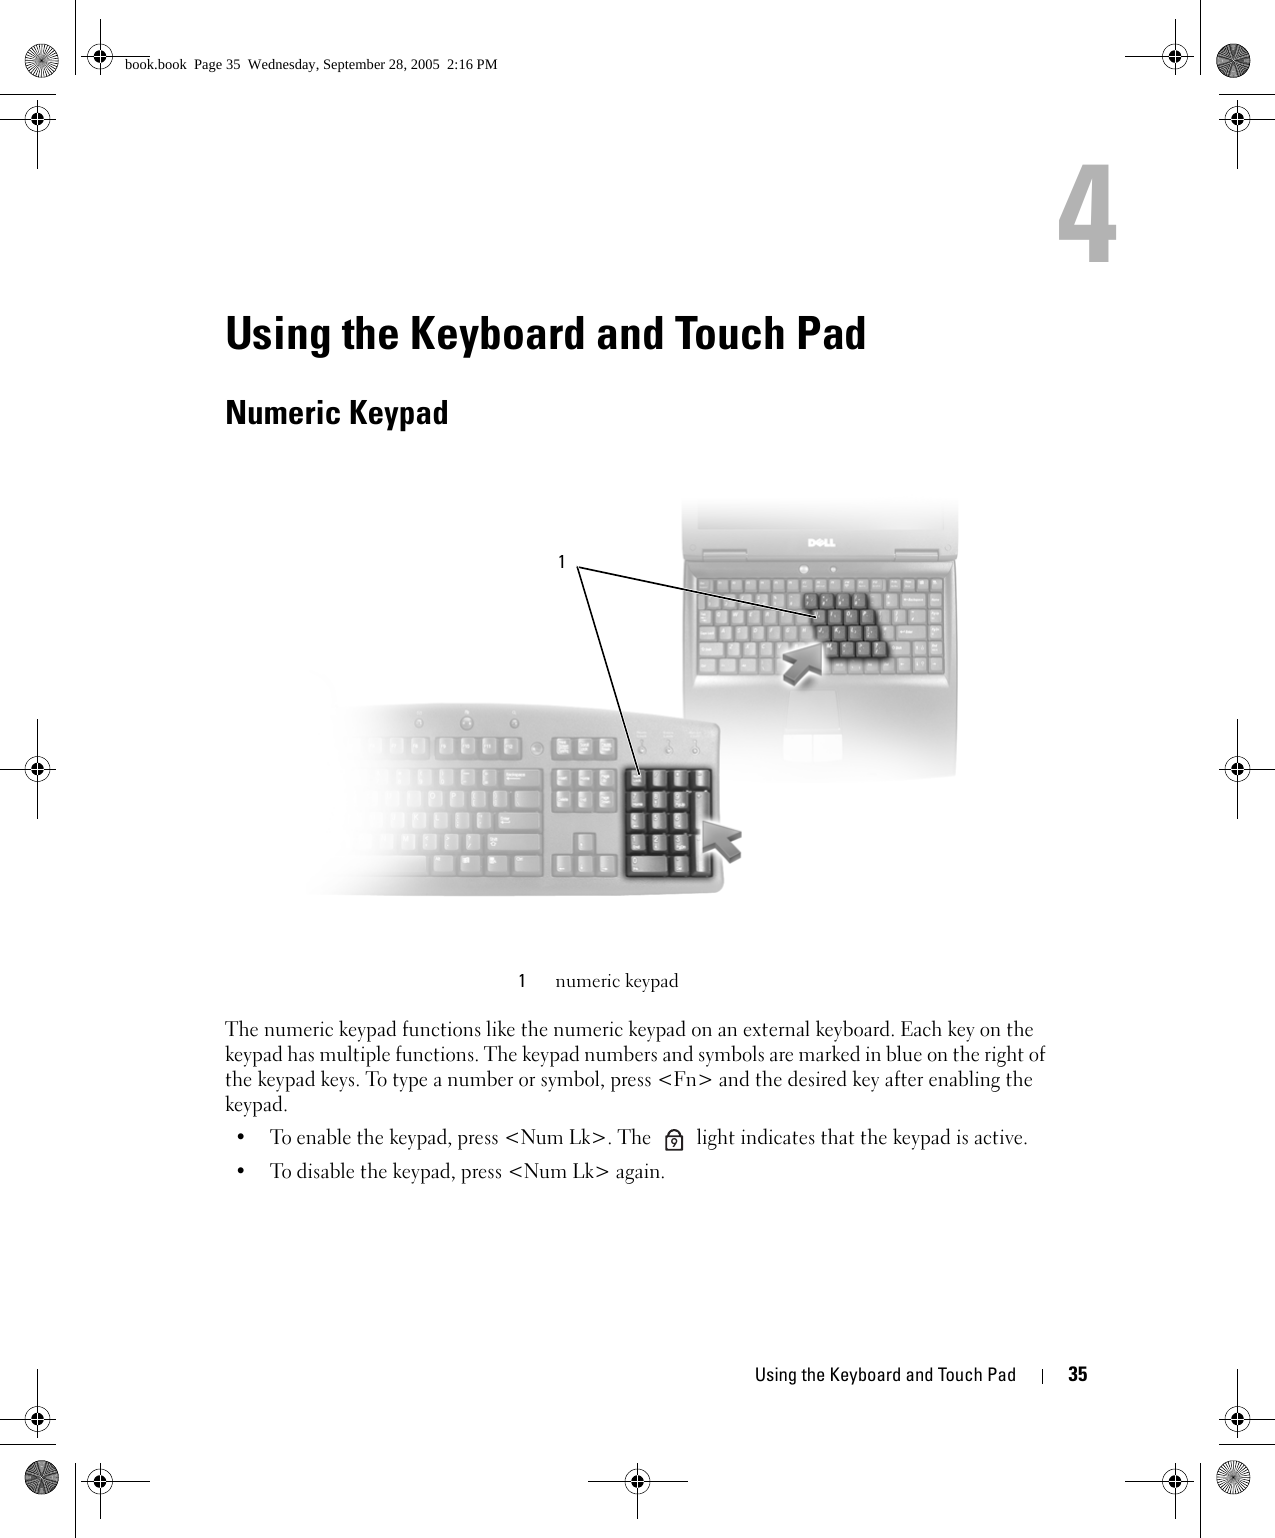 Using the Keyboard and Touch Pad 354Using the Keyboard and Touch PadNumeric KeypadThe numeric keypad functions like the numeric keypad on an external keyboard. Each key on the keypad has multiple functions. The keypad numbers and symbols are marked in blue on the right of the keypad keys. To type a number or symbol, press &lt;Fn&gt; and the desired key after enabling the keypad.• To enable the keypad, press &lt;Num Lk&gt;. The   light indicates that the keypad is active.• To disable the keypad, press &lt;Num Lk&gt; again. 1numeric keypad19book.book  Page 35  Wednesday, September 28, 2005  2:16 PM